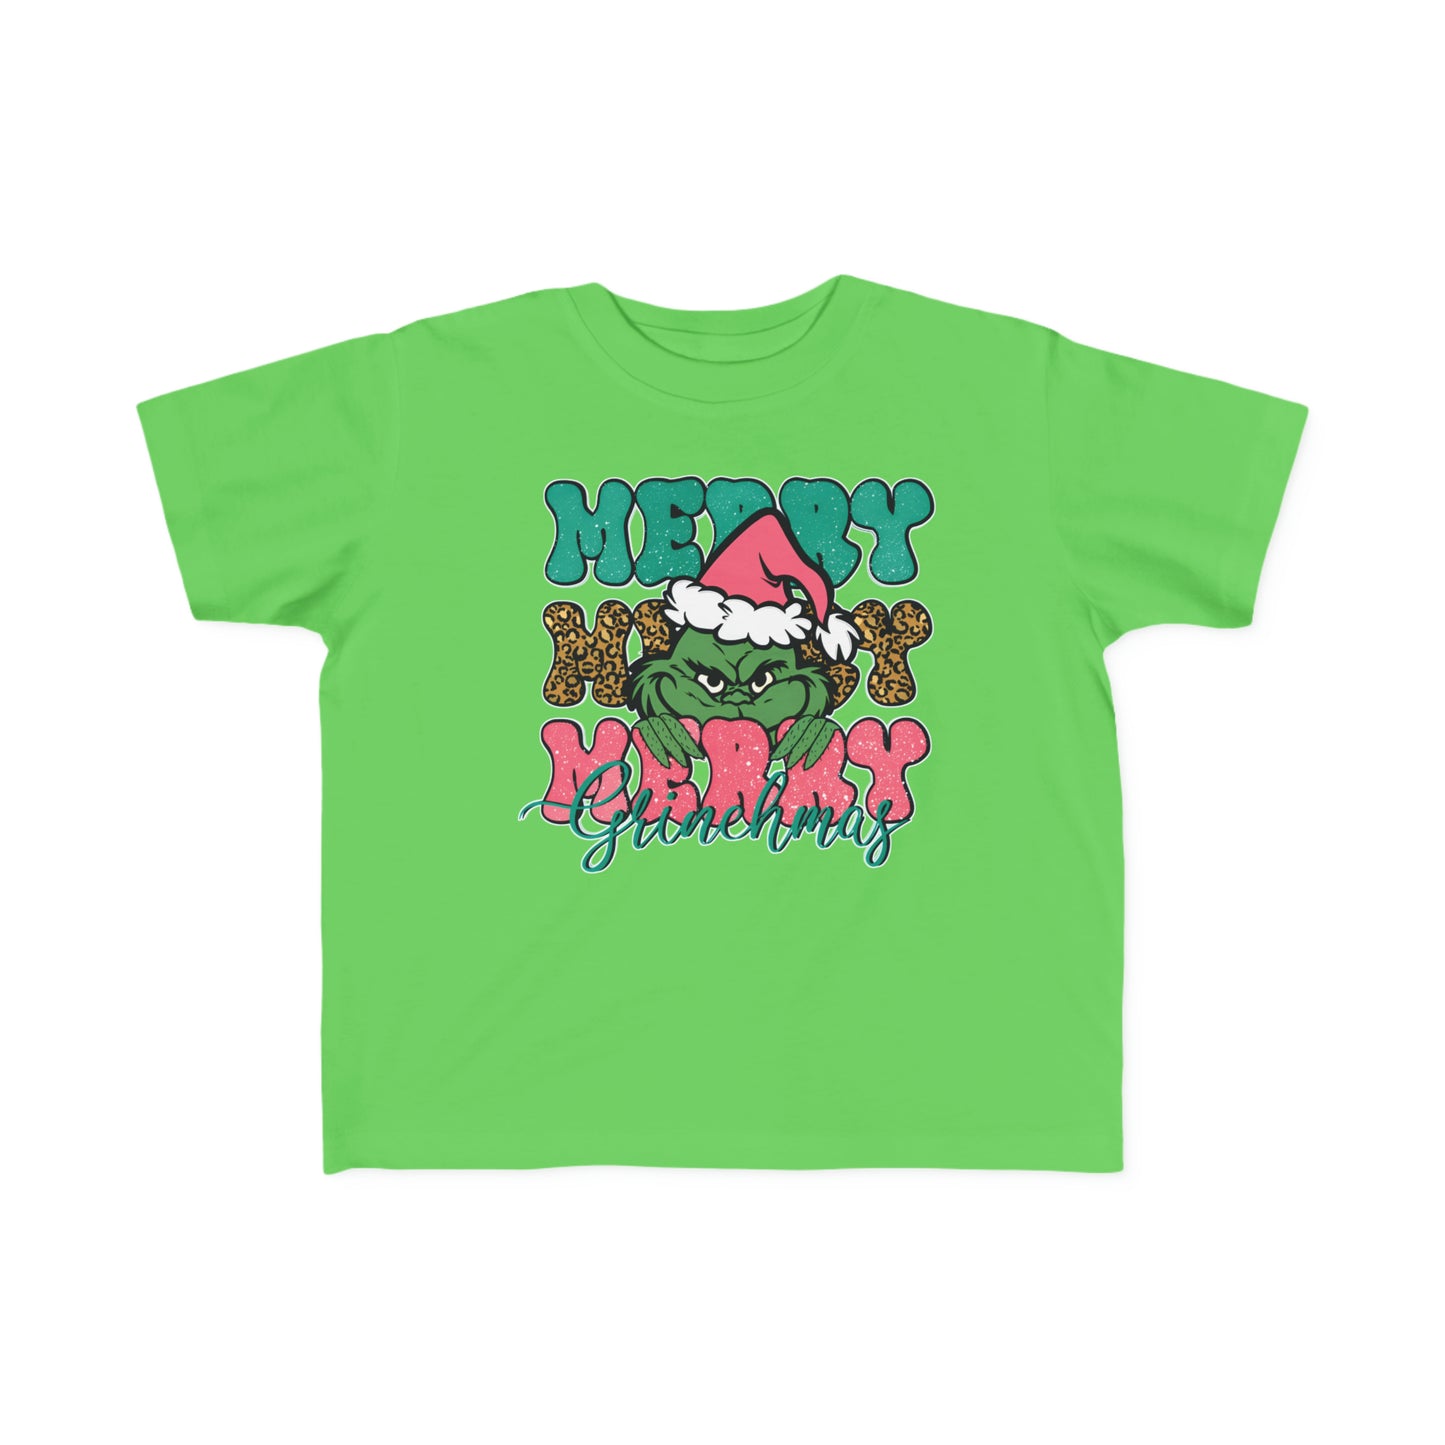 Merry Grinchmas Christmas Toddler's Fine Jersey Tee